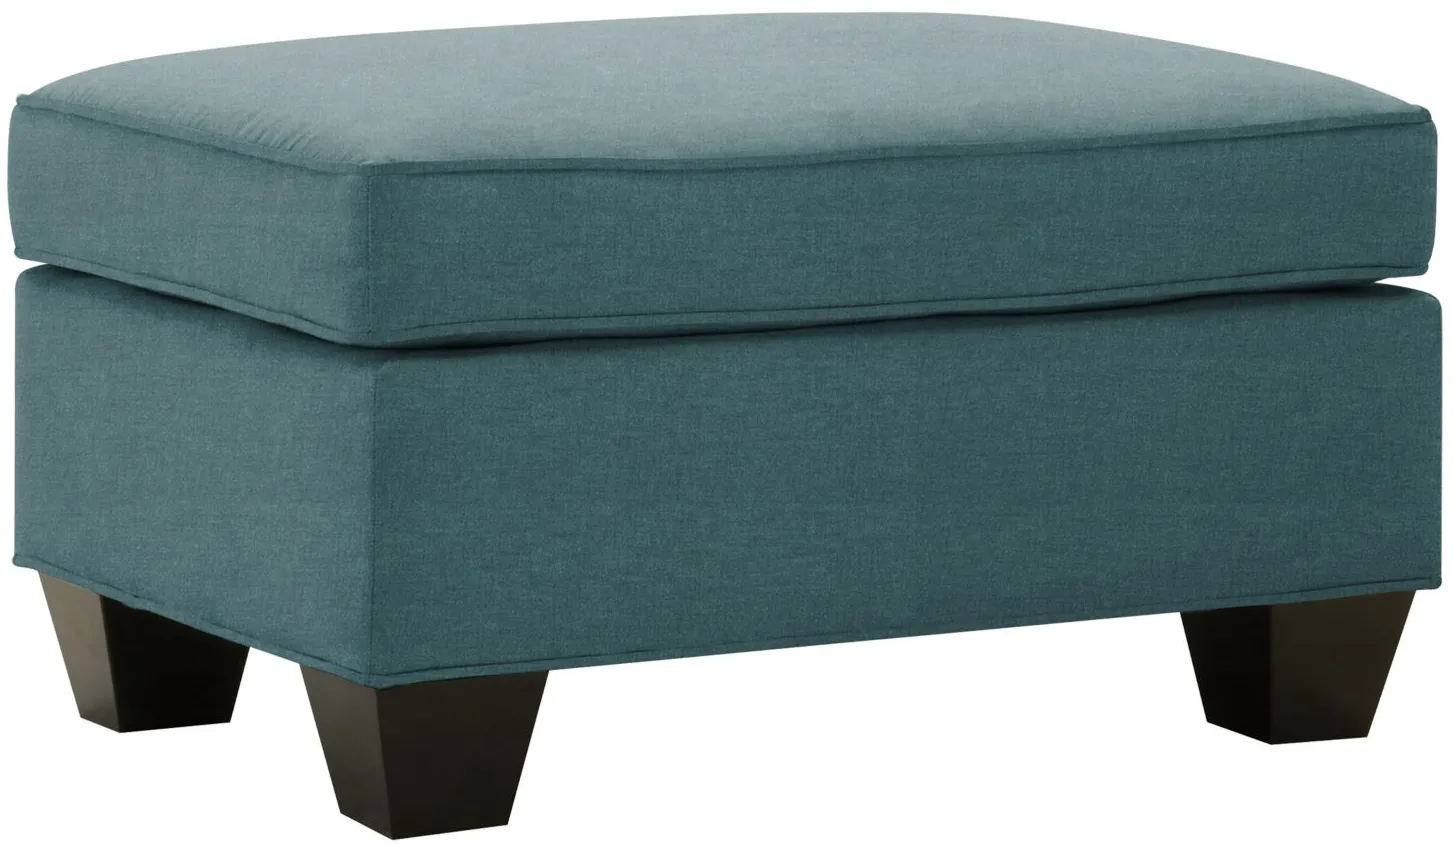 Briarwood Microfiber Ottoman in Santa Rosa Turquoise by H.M. Richards